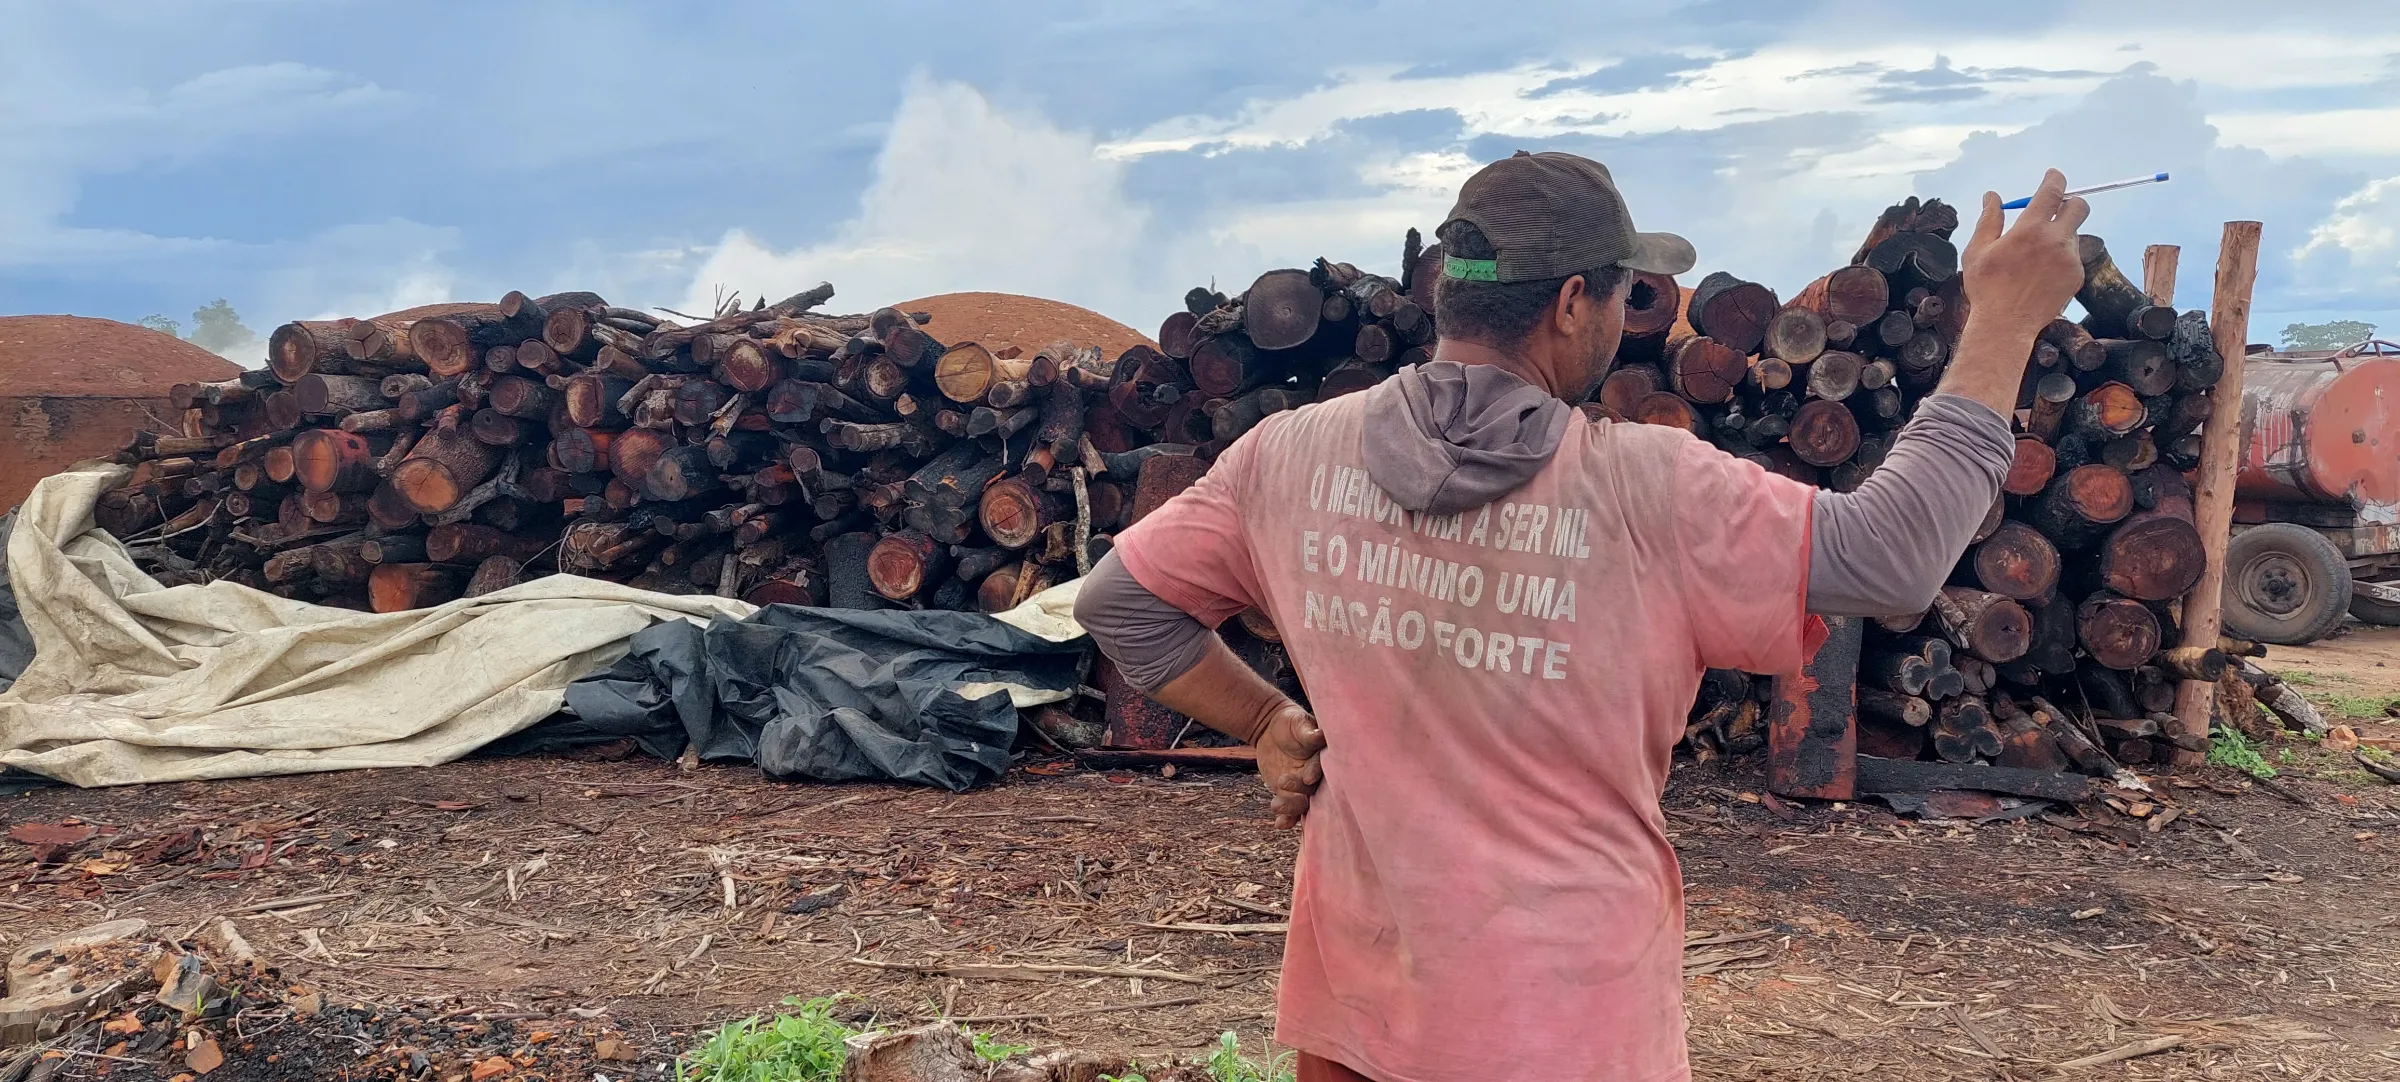 A charcoal producer shows the stockpile of native Cerrado trees that were to be burned to produce charcoal in Brazil. December 6th, 2021. Thomson Reuters Foundation/Fabio Teixeira